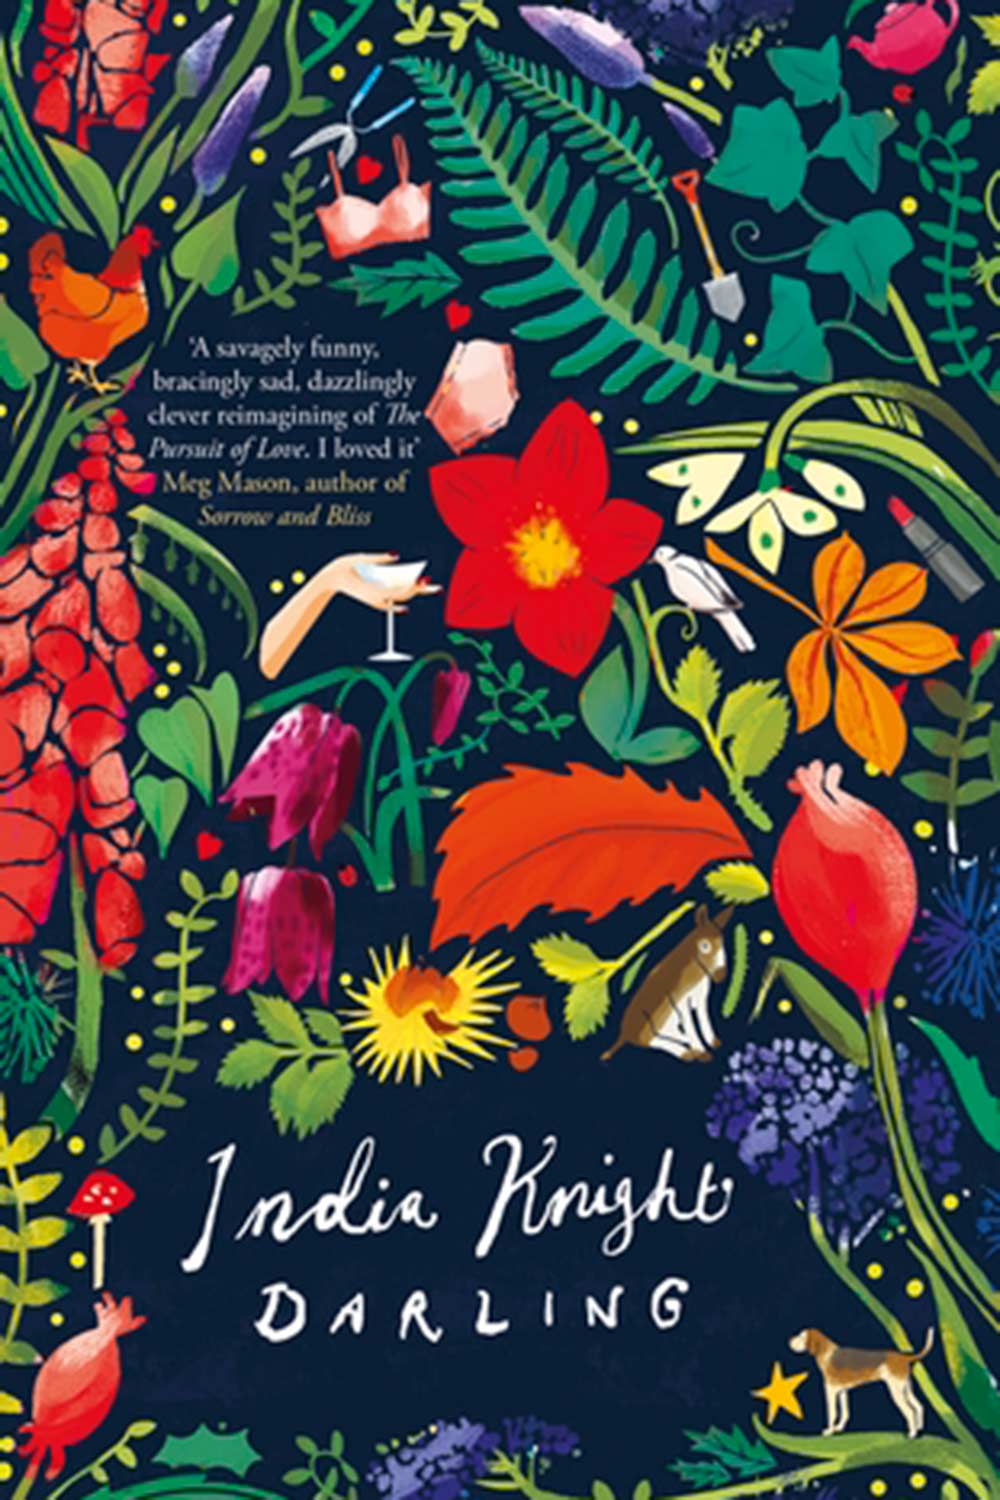 The front cover of India Knight